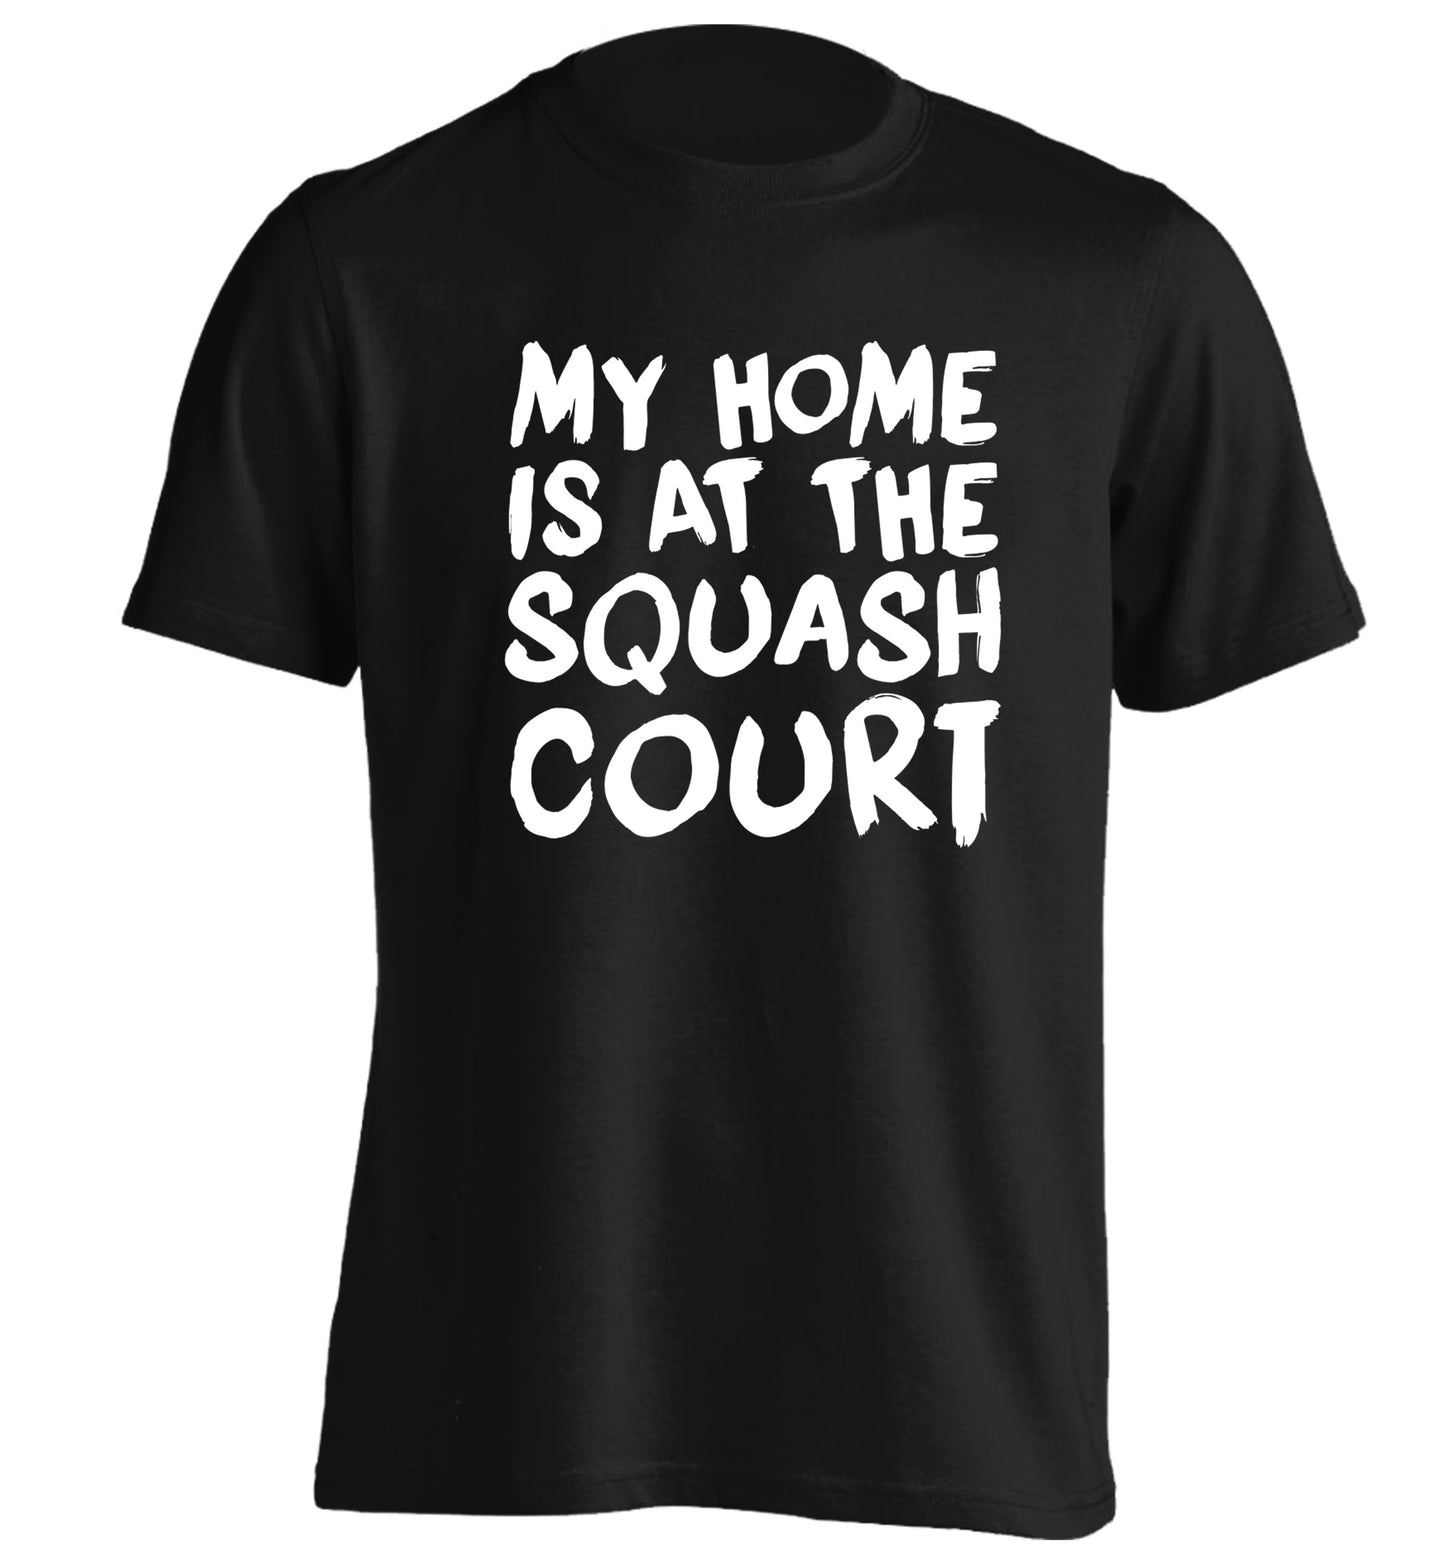 My home is at the squash court adults unisex black Tshirt 2XL